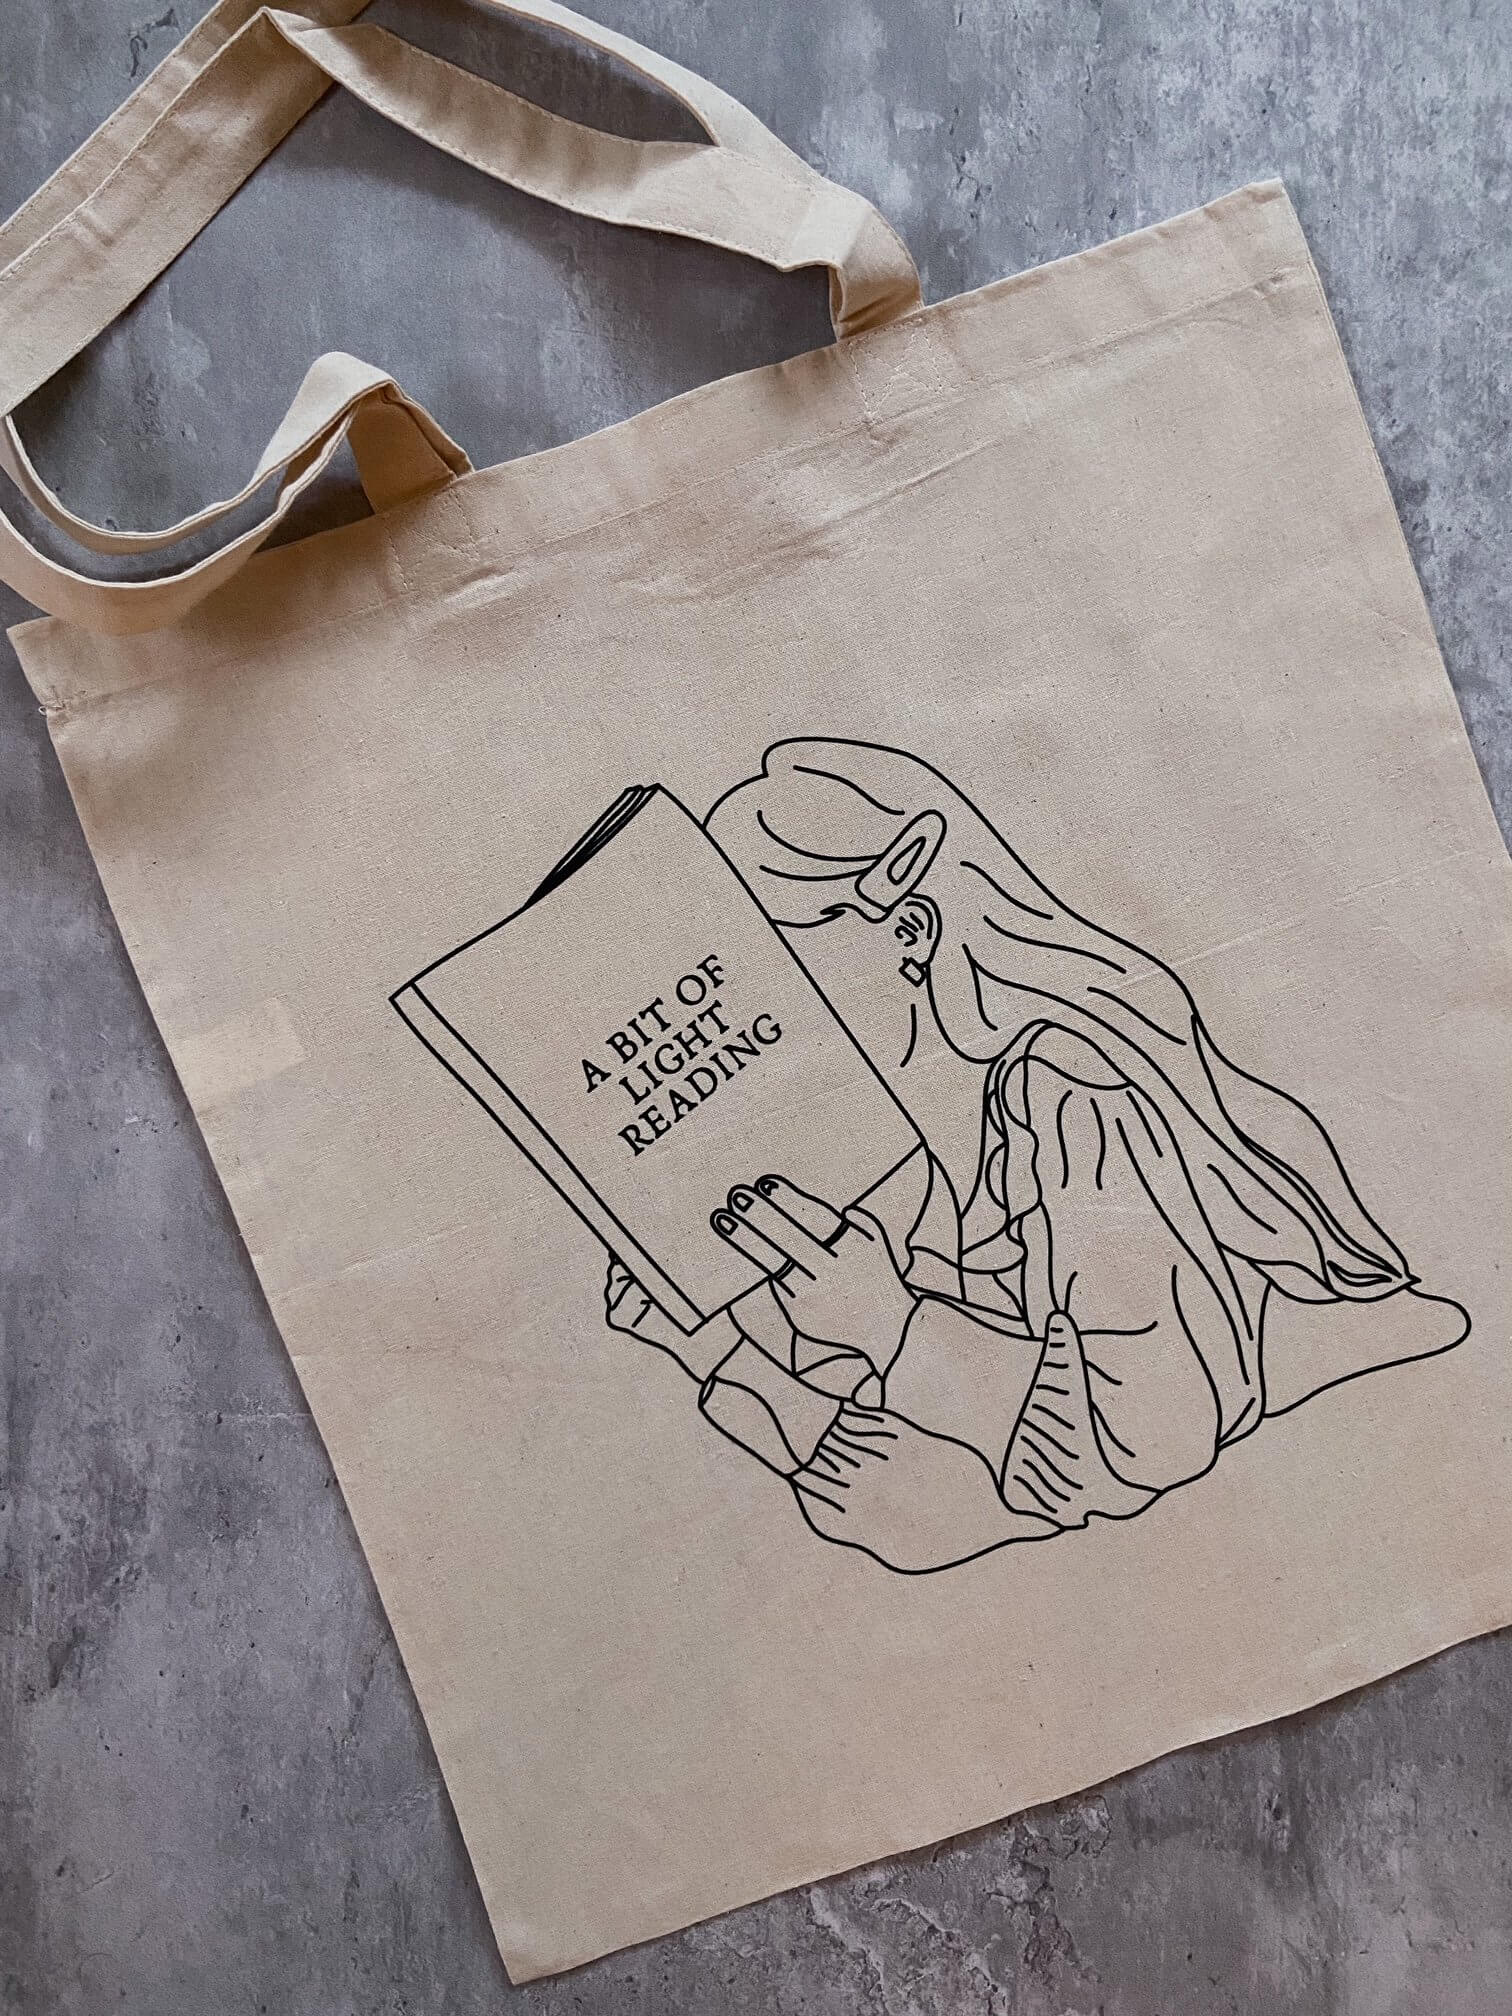 natural canvas tote bag with image of girl reading book titled "A Bit of Light Reading".